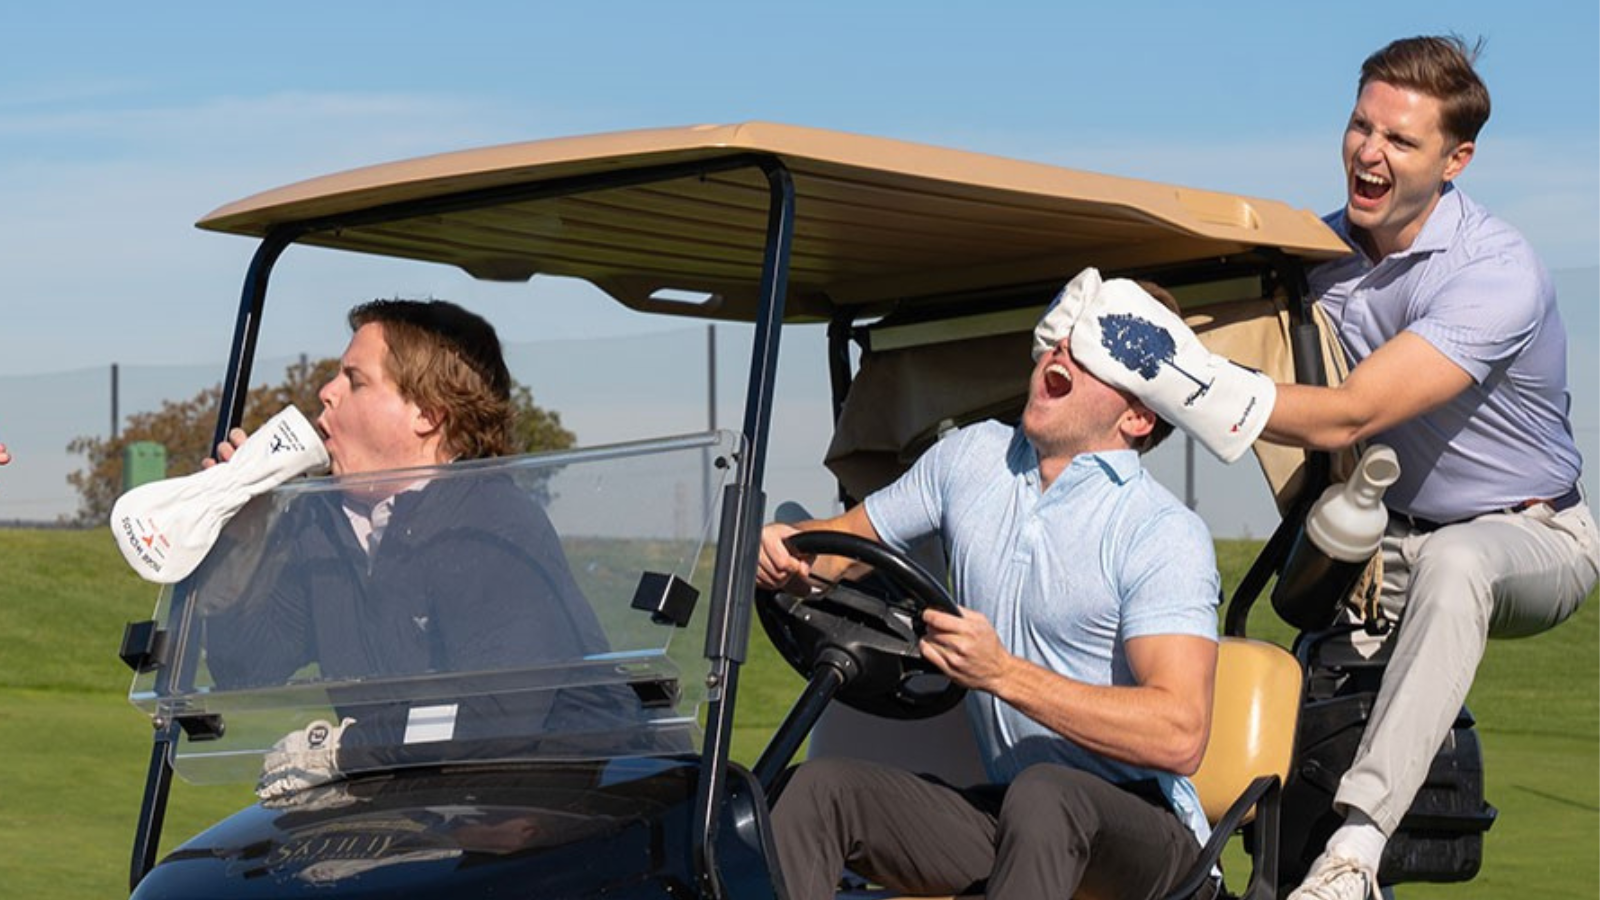 Three men riding a golf cart, acting silly.